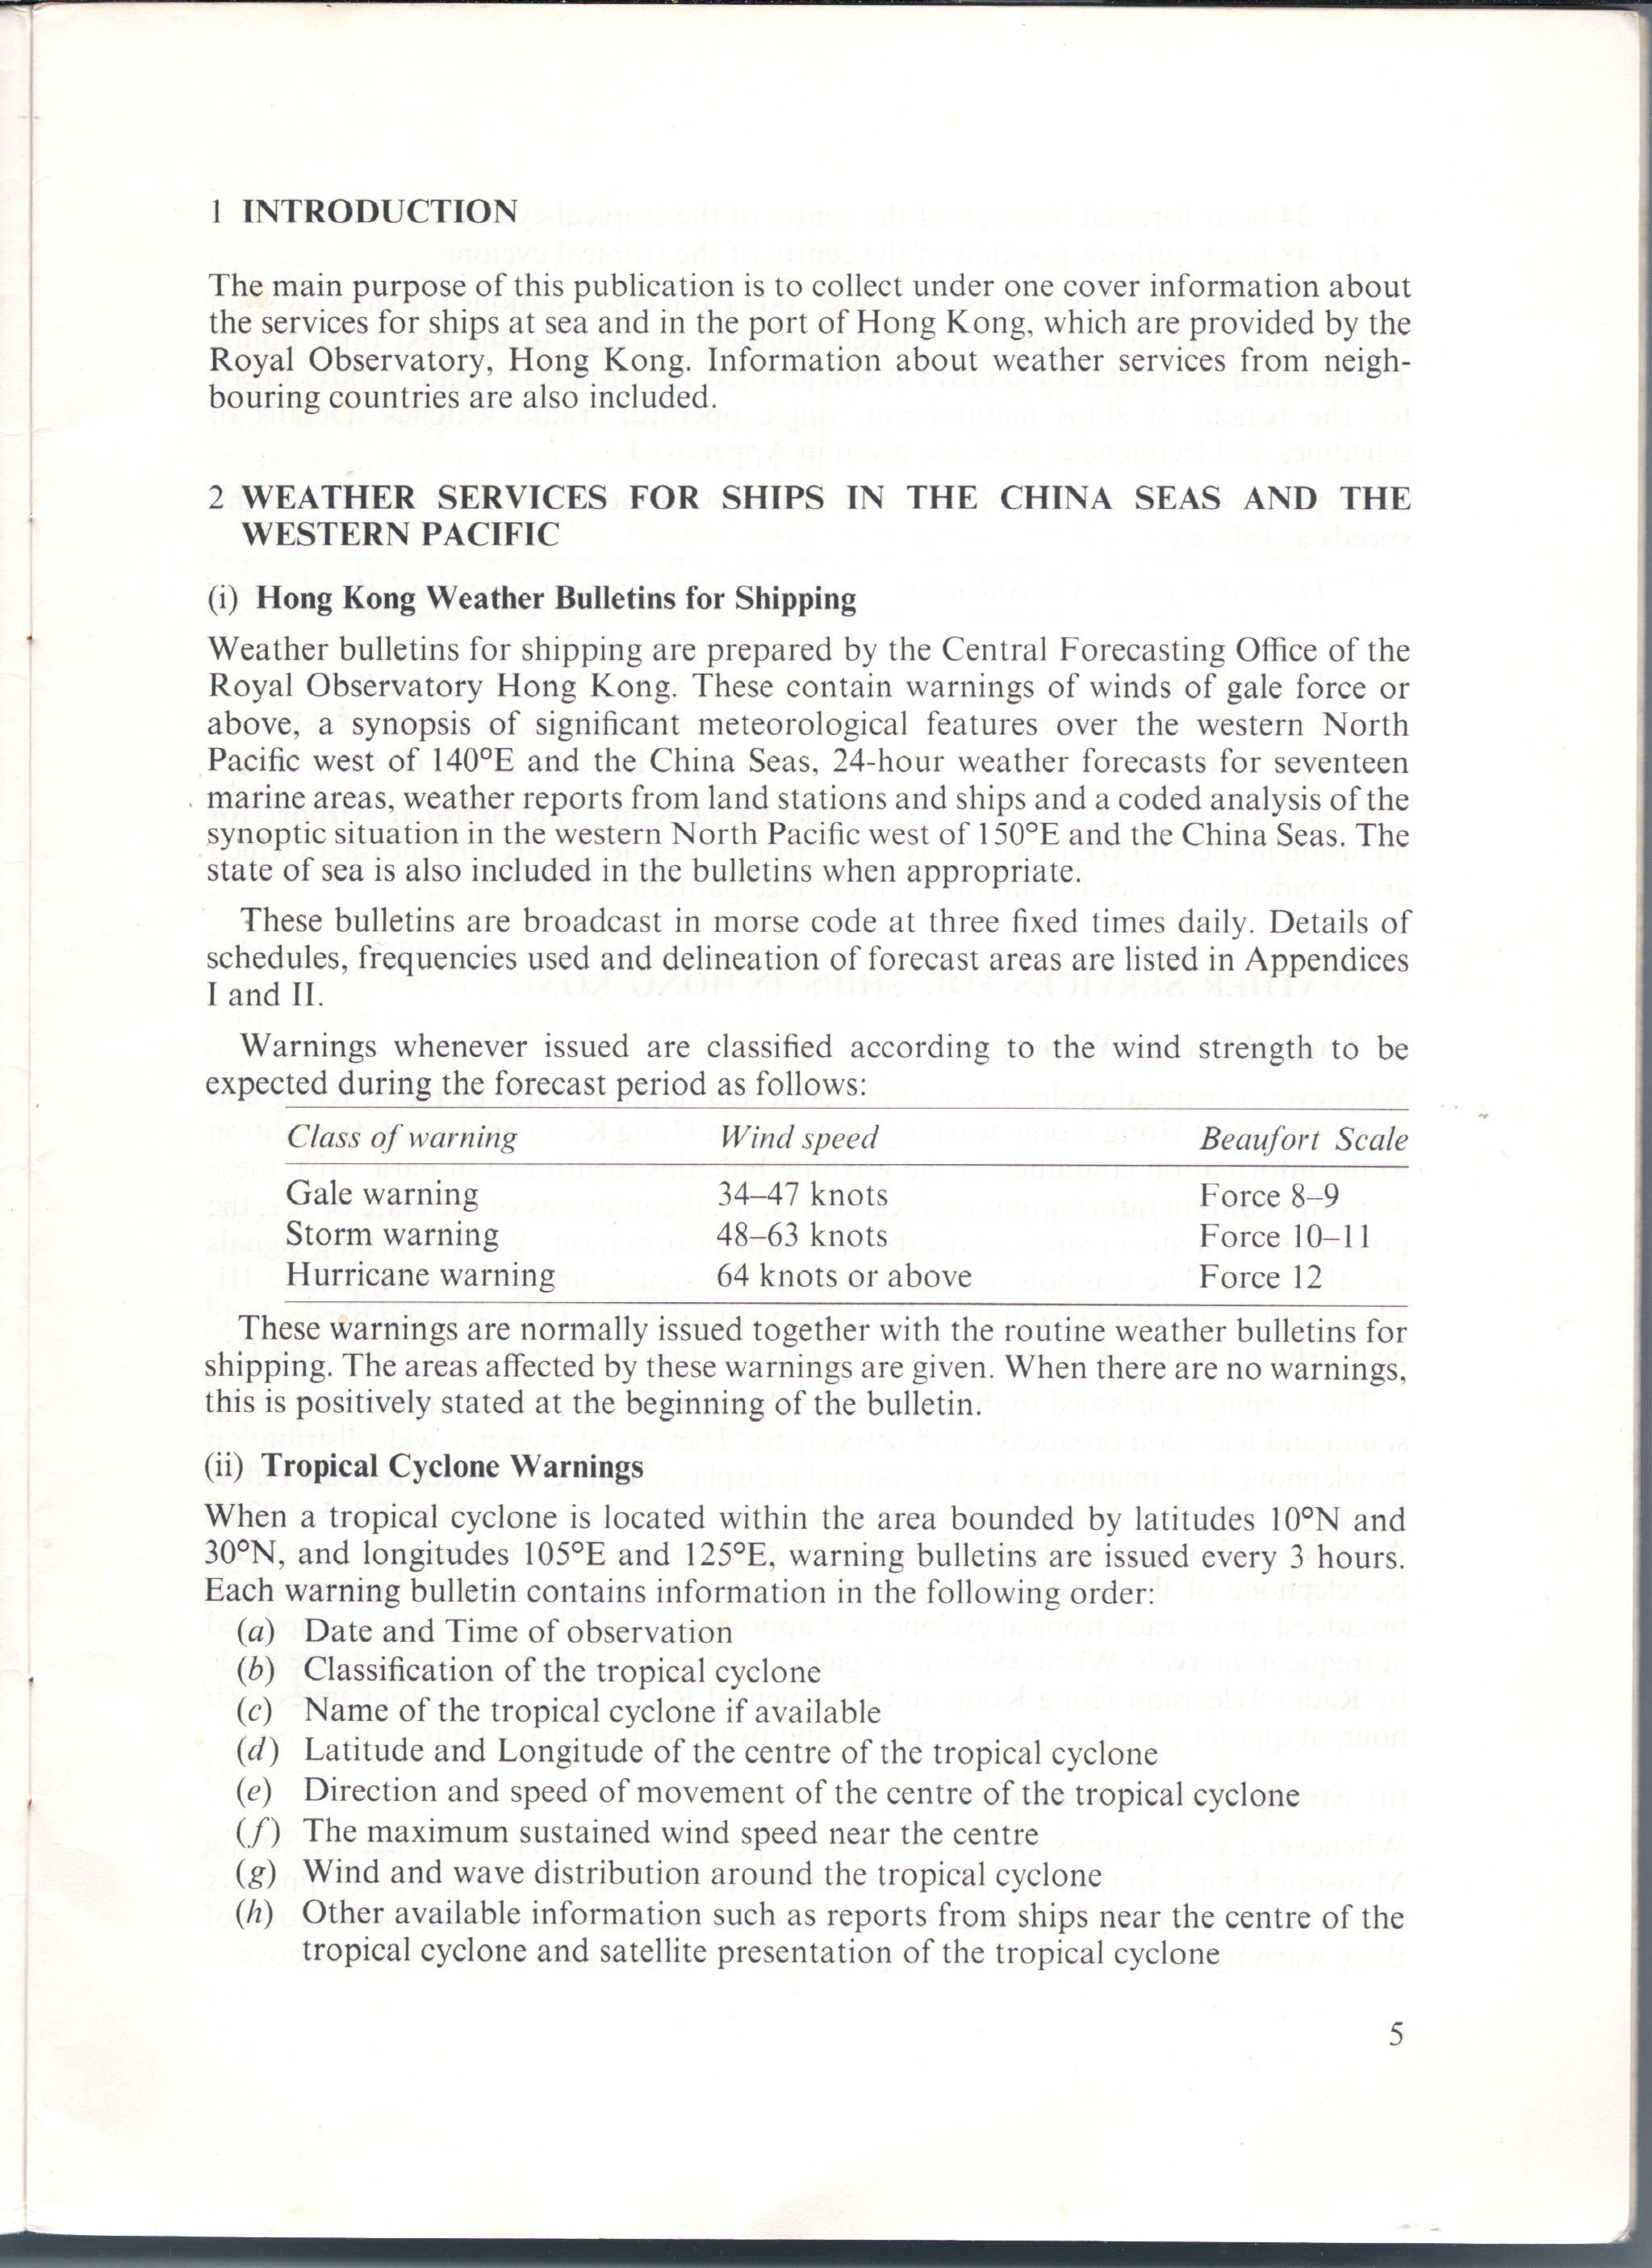 HONG KONG  WEATHER SERVICES FOR SHIPPING 1984 - 05.JPG